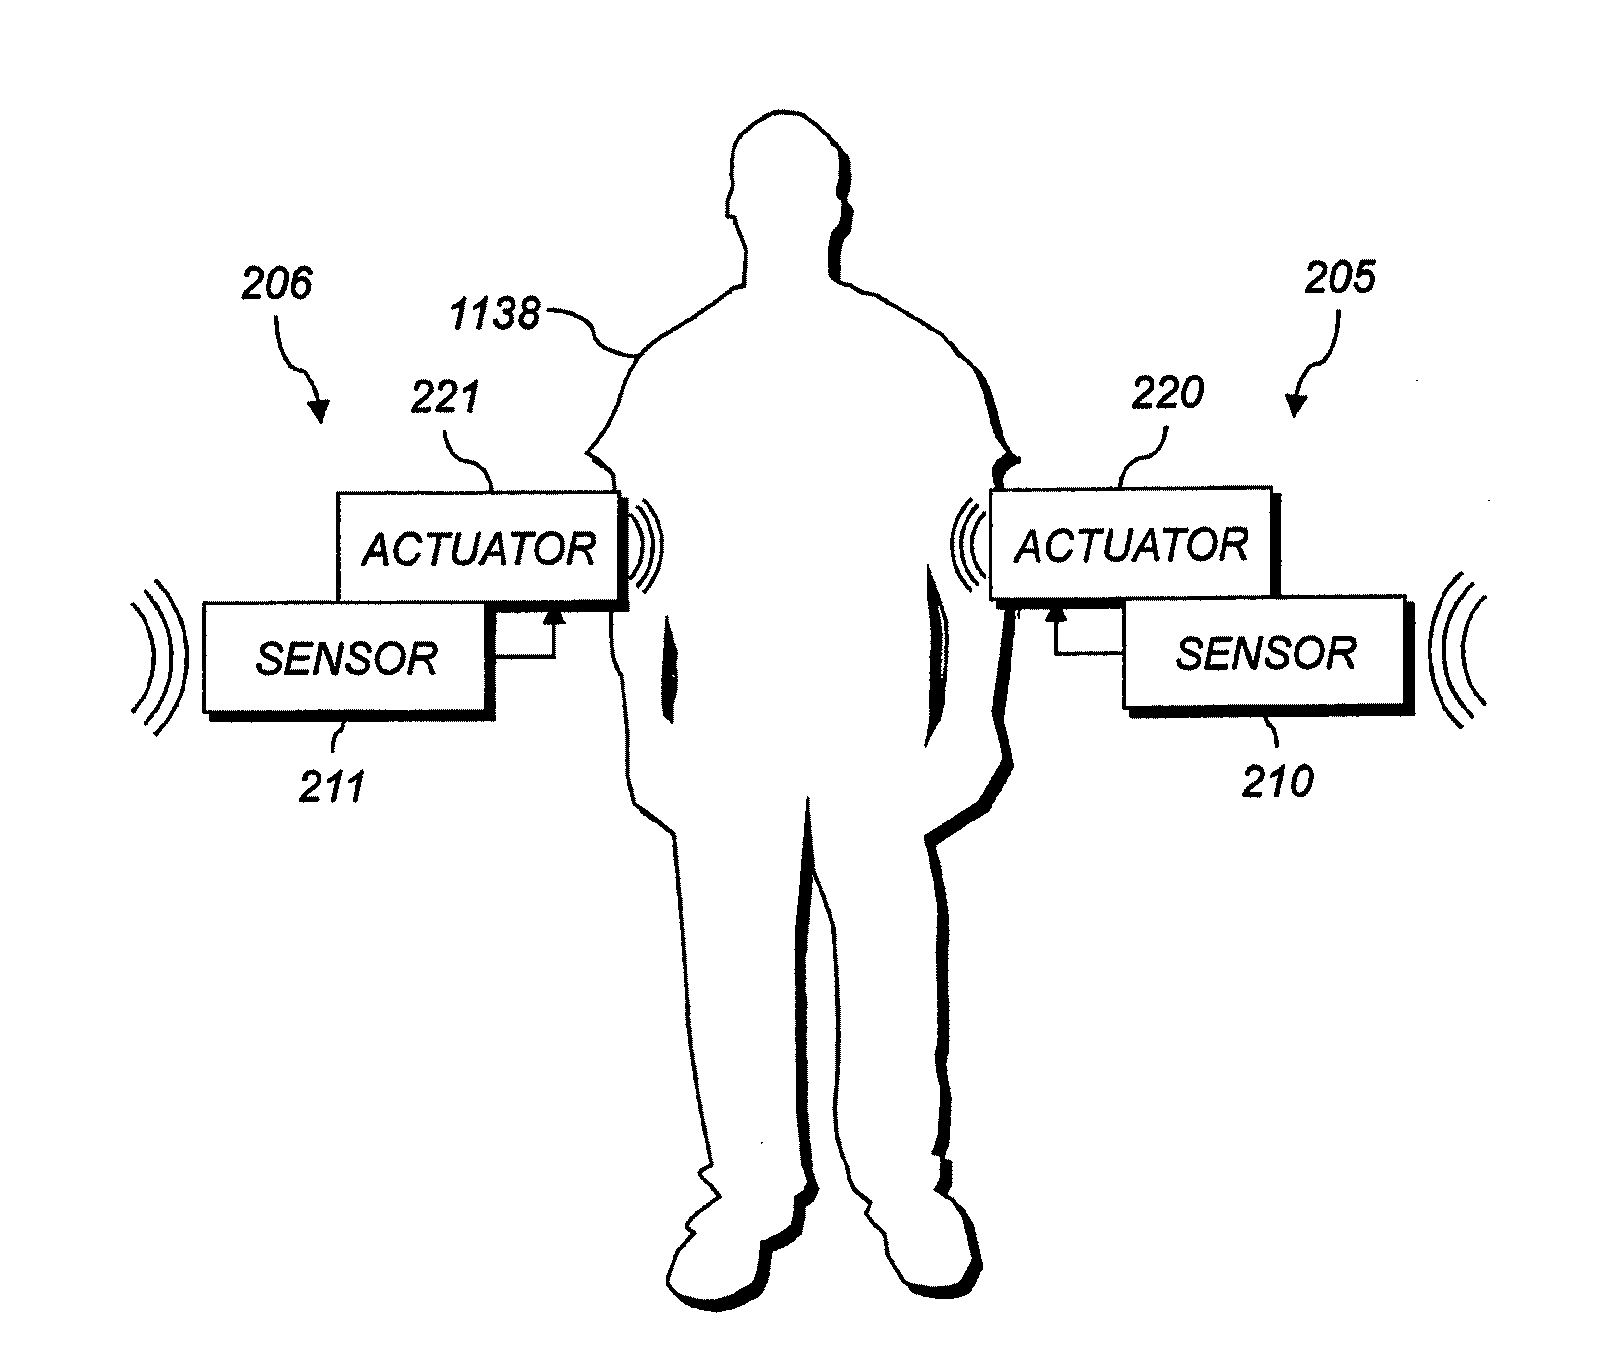 Wearable navigation assistance for the vision-impaired